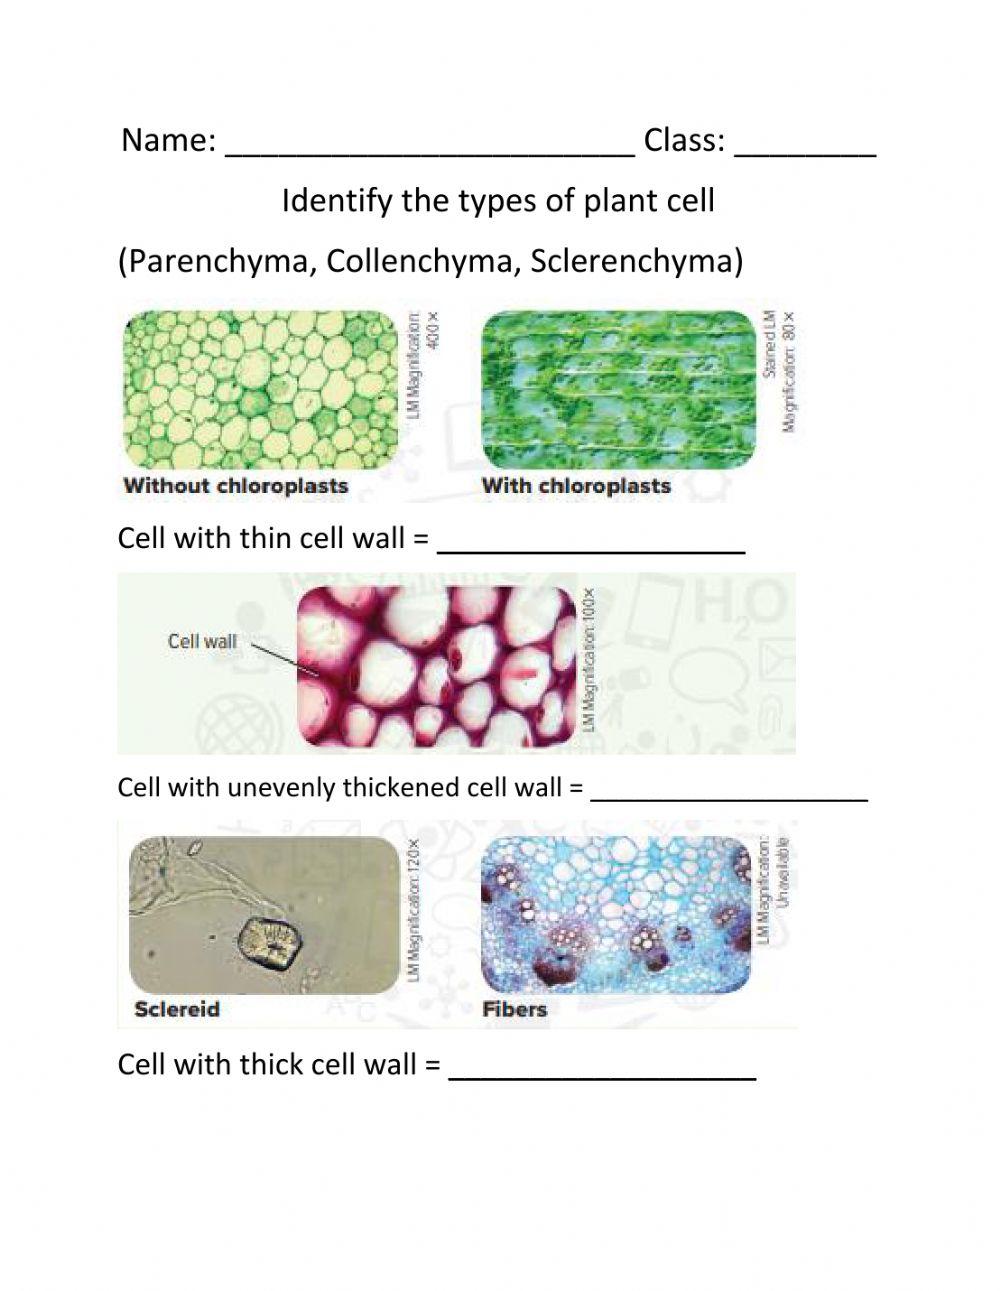 Types of plant cell